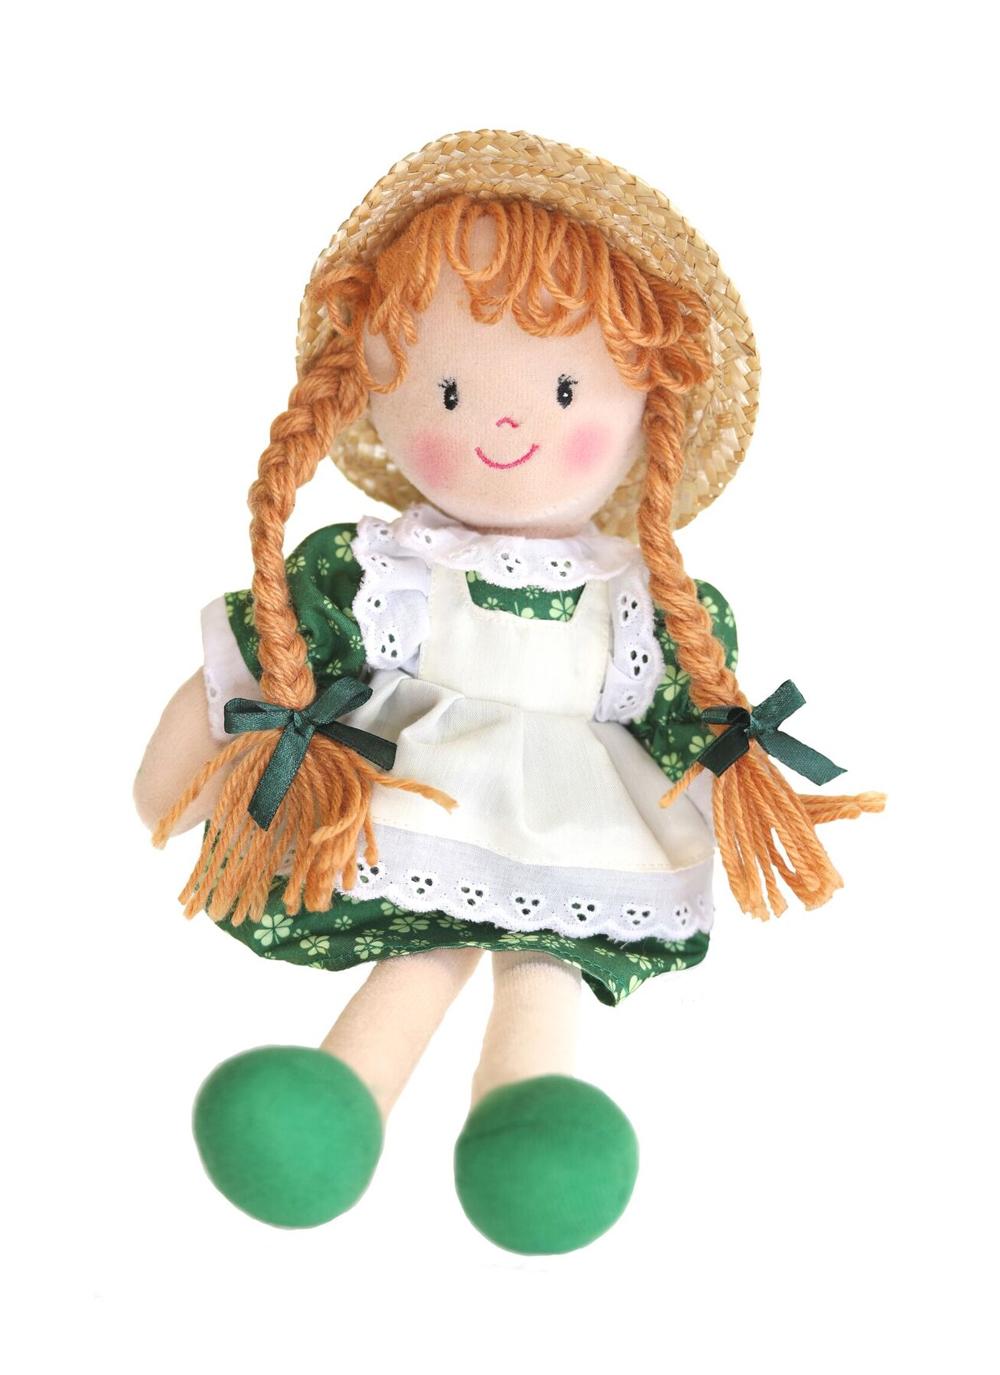 Grainne The Irish Rag Doll In A Dress And Apron With Straw Hat 